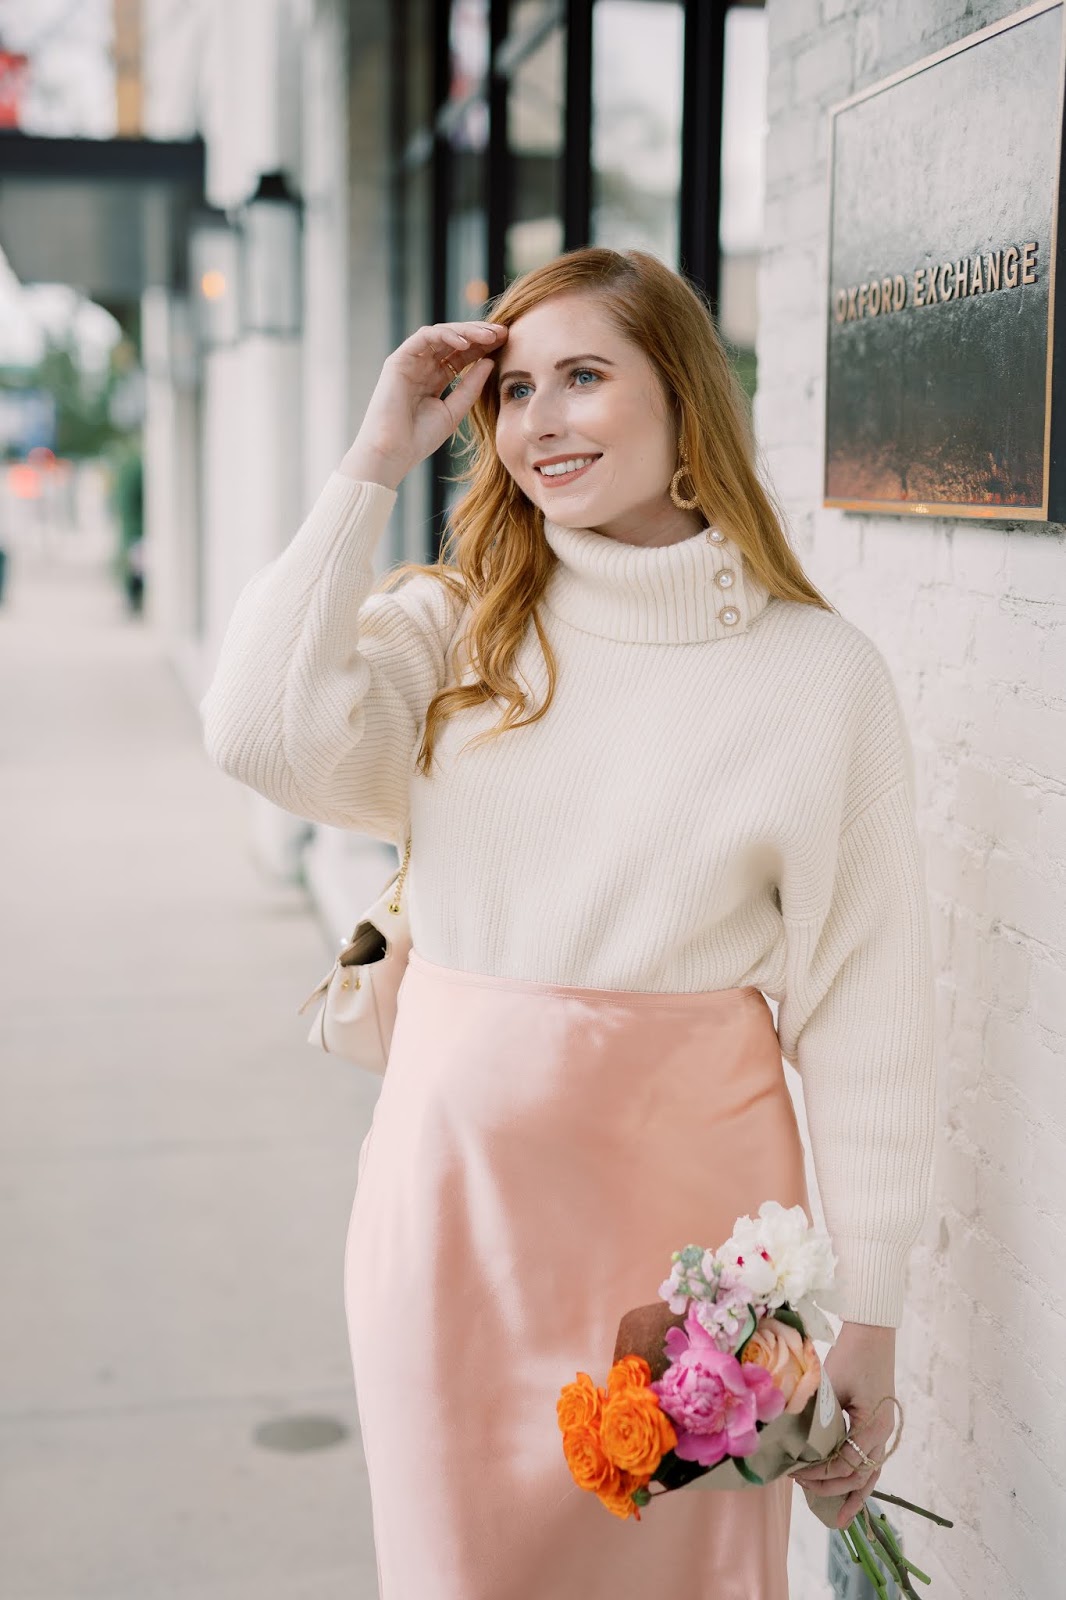 Where to Snag The Best Turtleneck Sweaters Under $50 | Style Blogger Amanda Burrows of Affordable by Amanda wears a cream chunky rib-knit turtleneck from H&M and a pink satin midi skirt from LC Lauren Conrads Kohl's collection at Oxford Exchange in Tampa, Florida. Photo taken by Studio Magnolia.